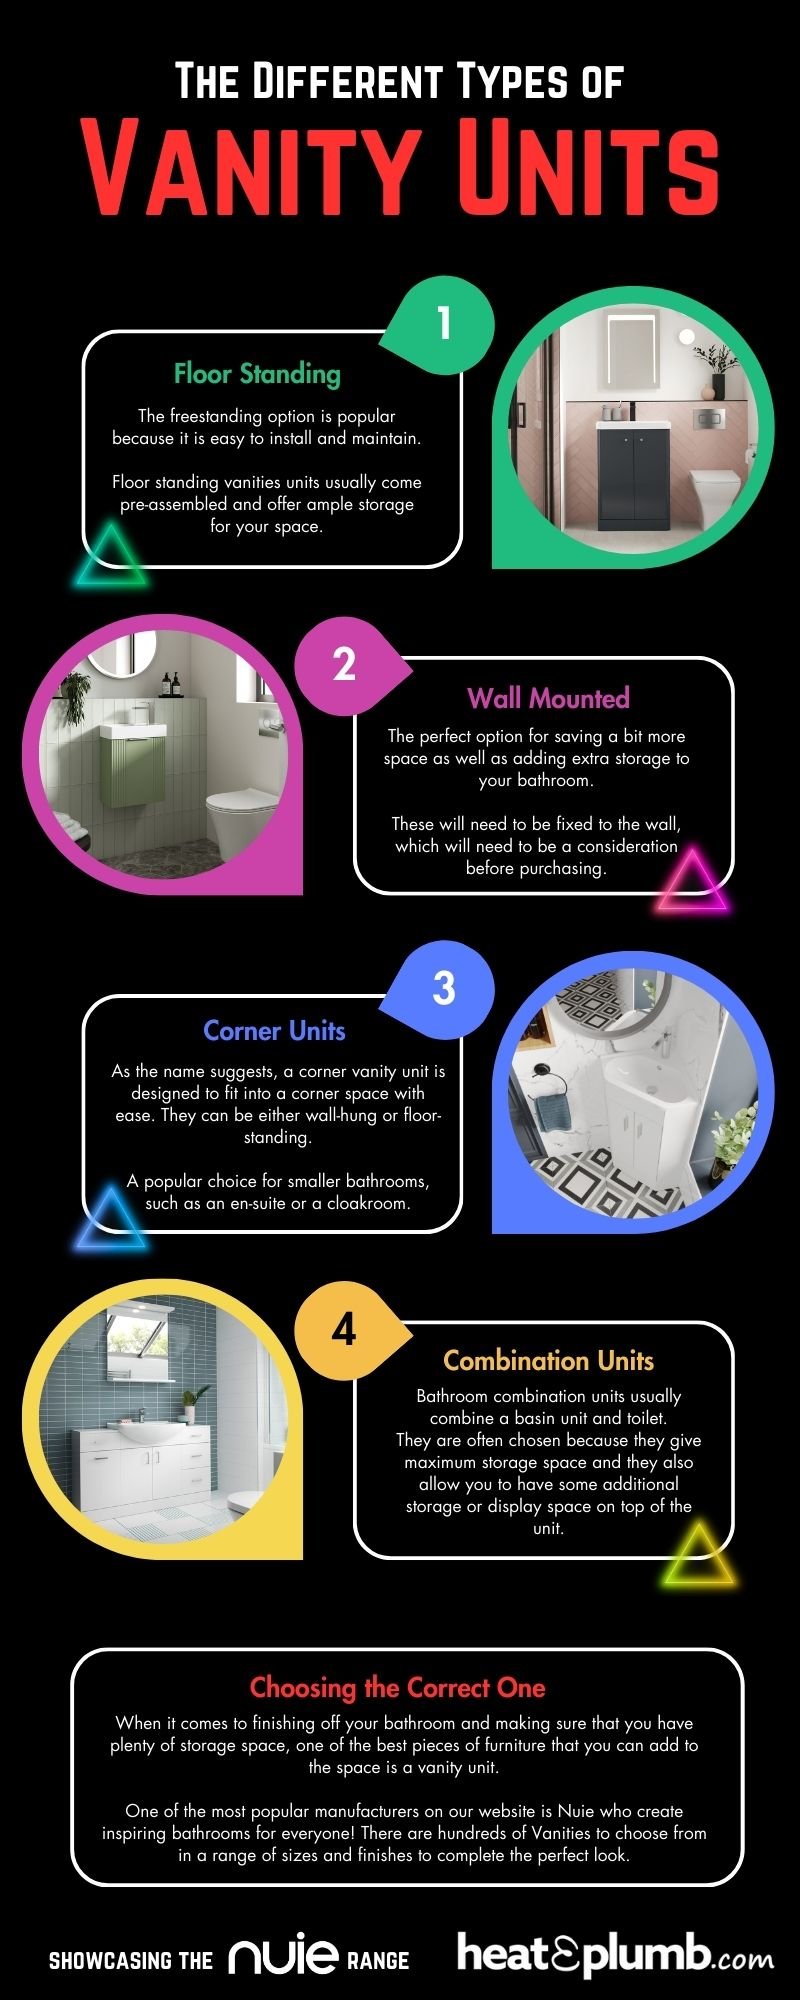 The Different Types of Vanity Units Infographic